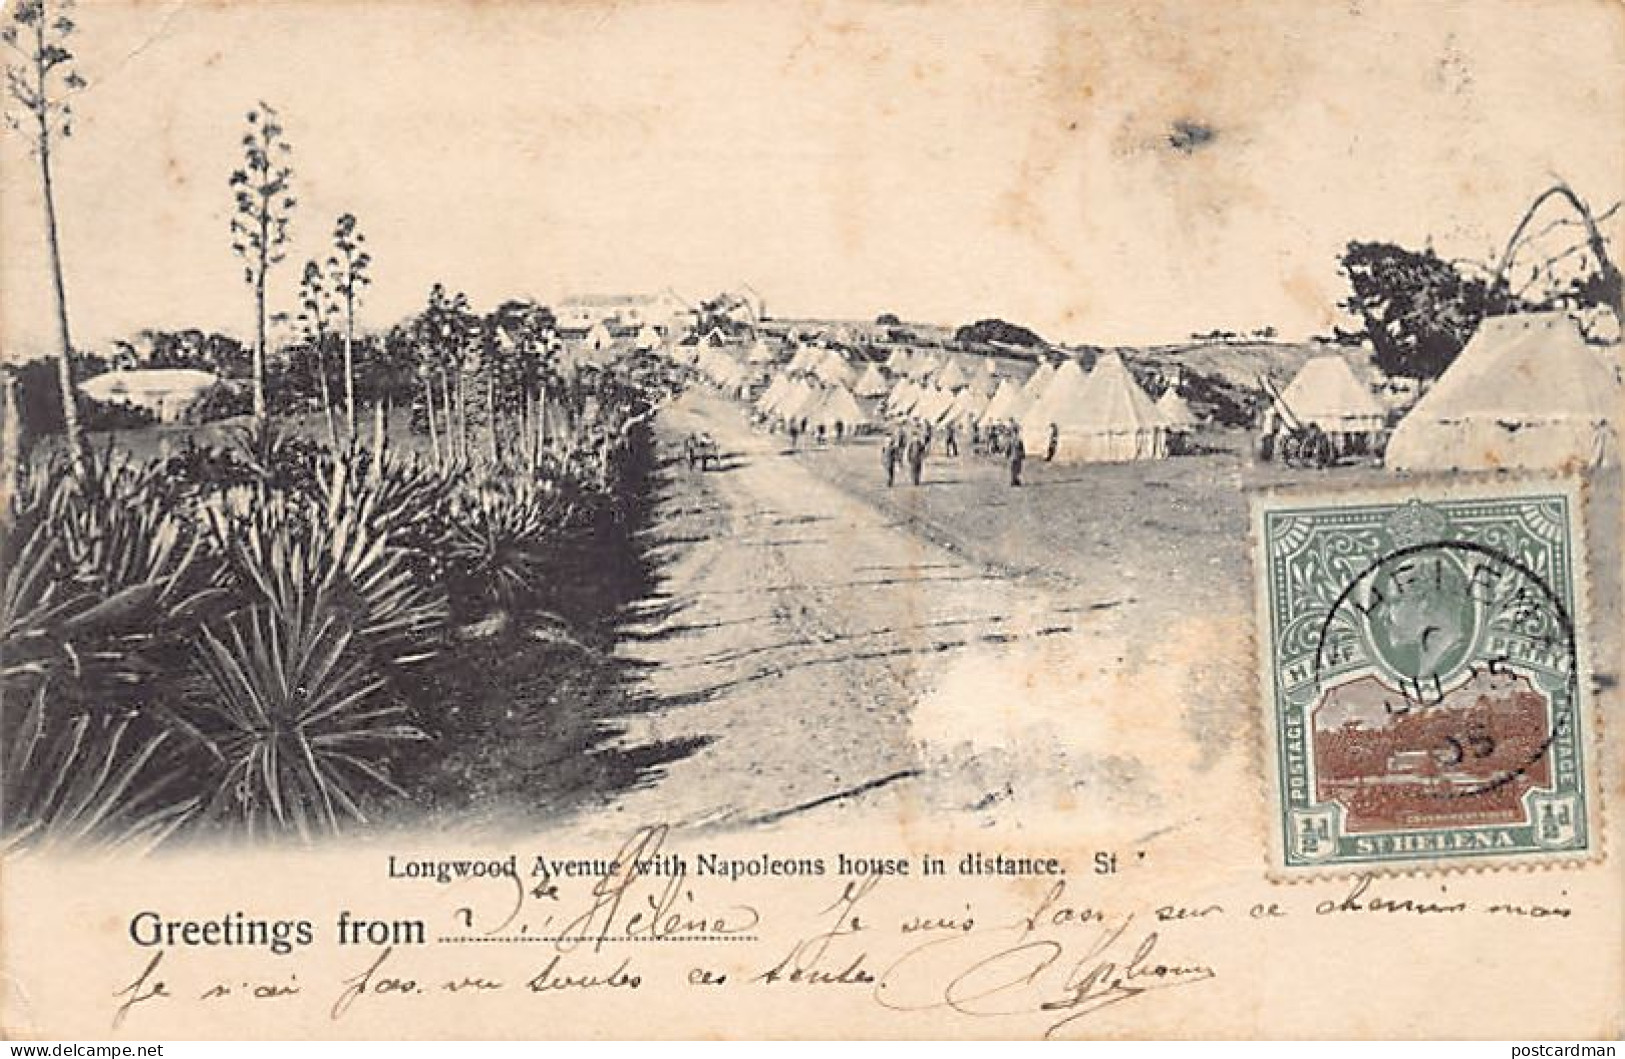 ST. HELENA - Longwood Avenue With Napoleon's House In Distance - Tent Camp, Possibly Interned Boer Prisoners - SEE SCANS - Saint Helena Island